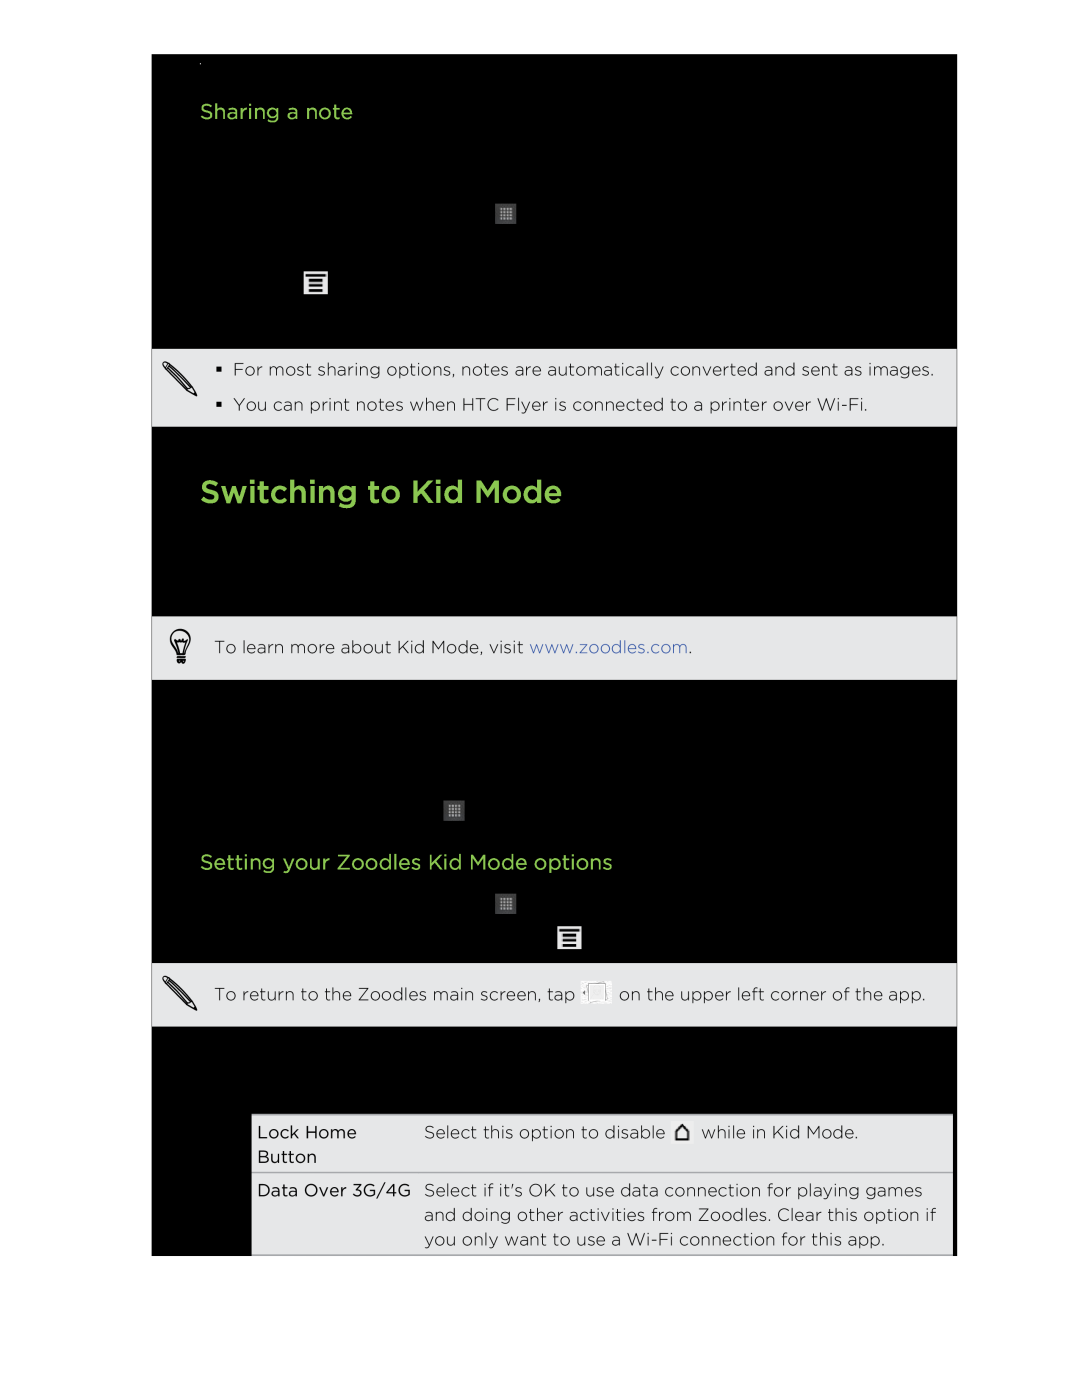 HTC HTCFlyerP512 manual Switching to Kid Mode, Sharing a note, Setting your Zoodles Kid Mode options 